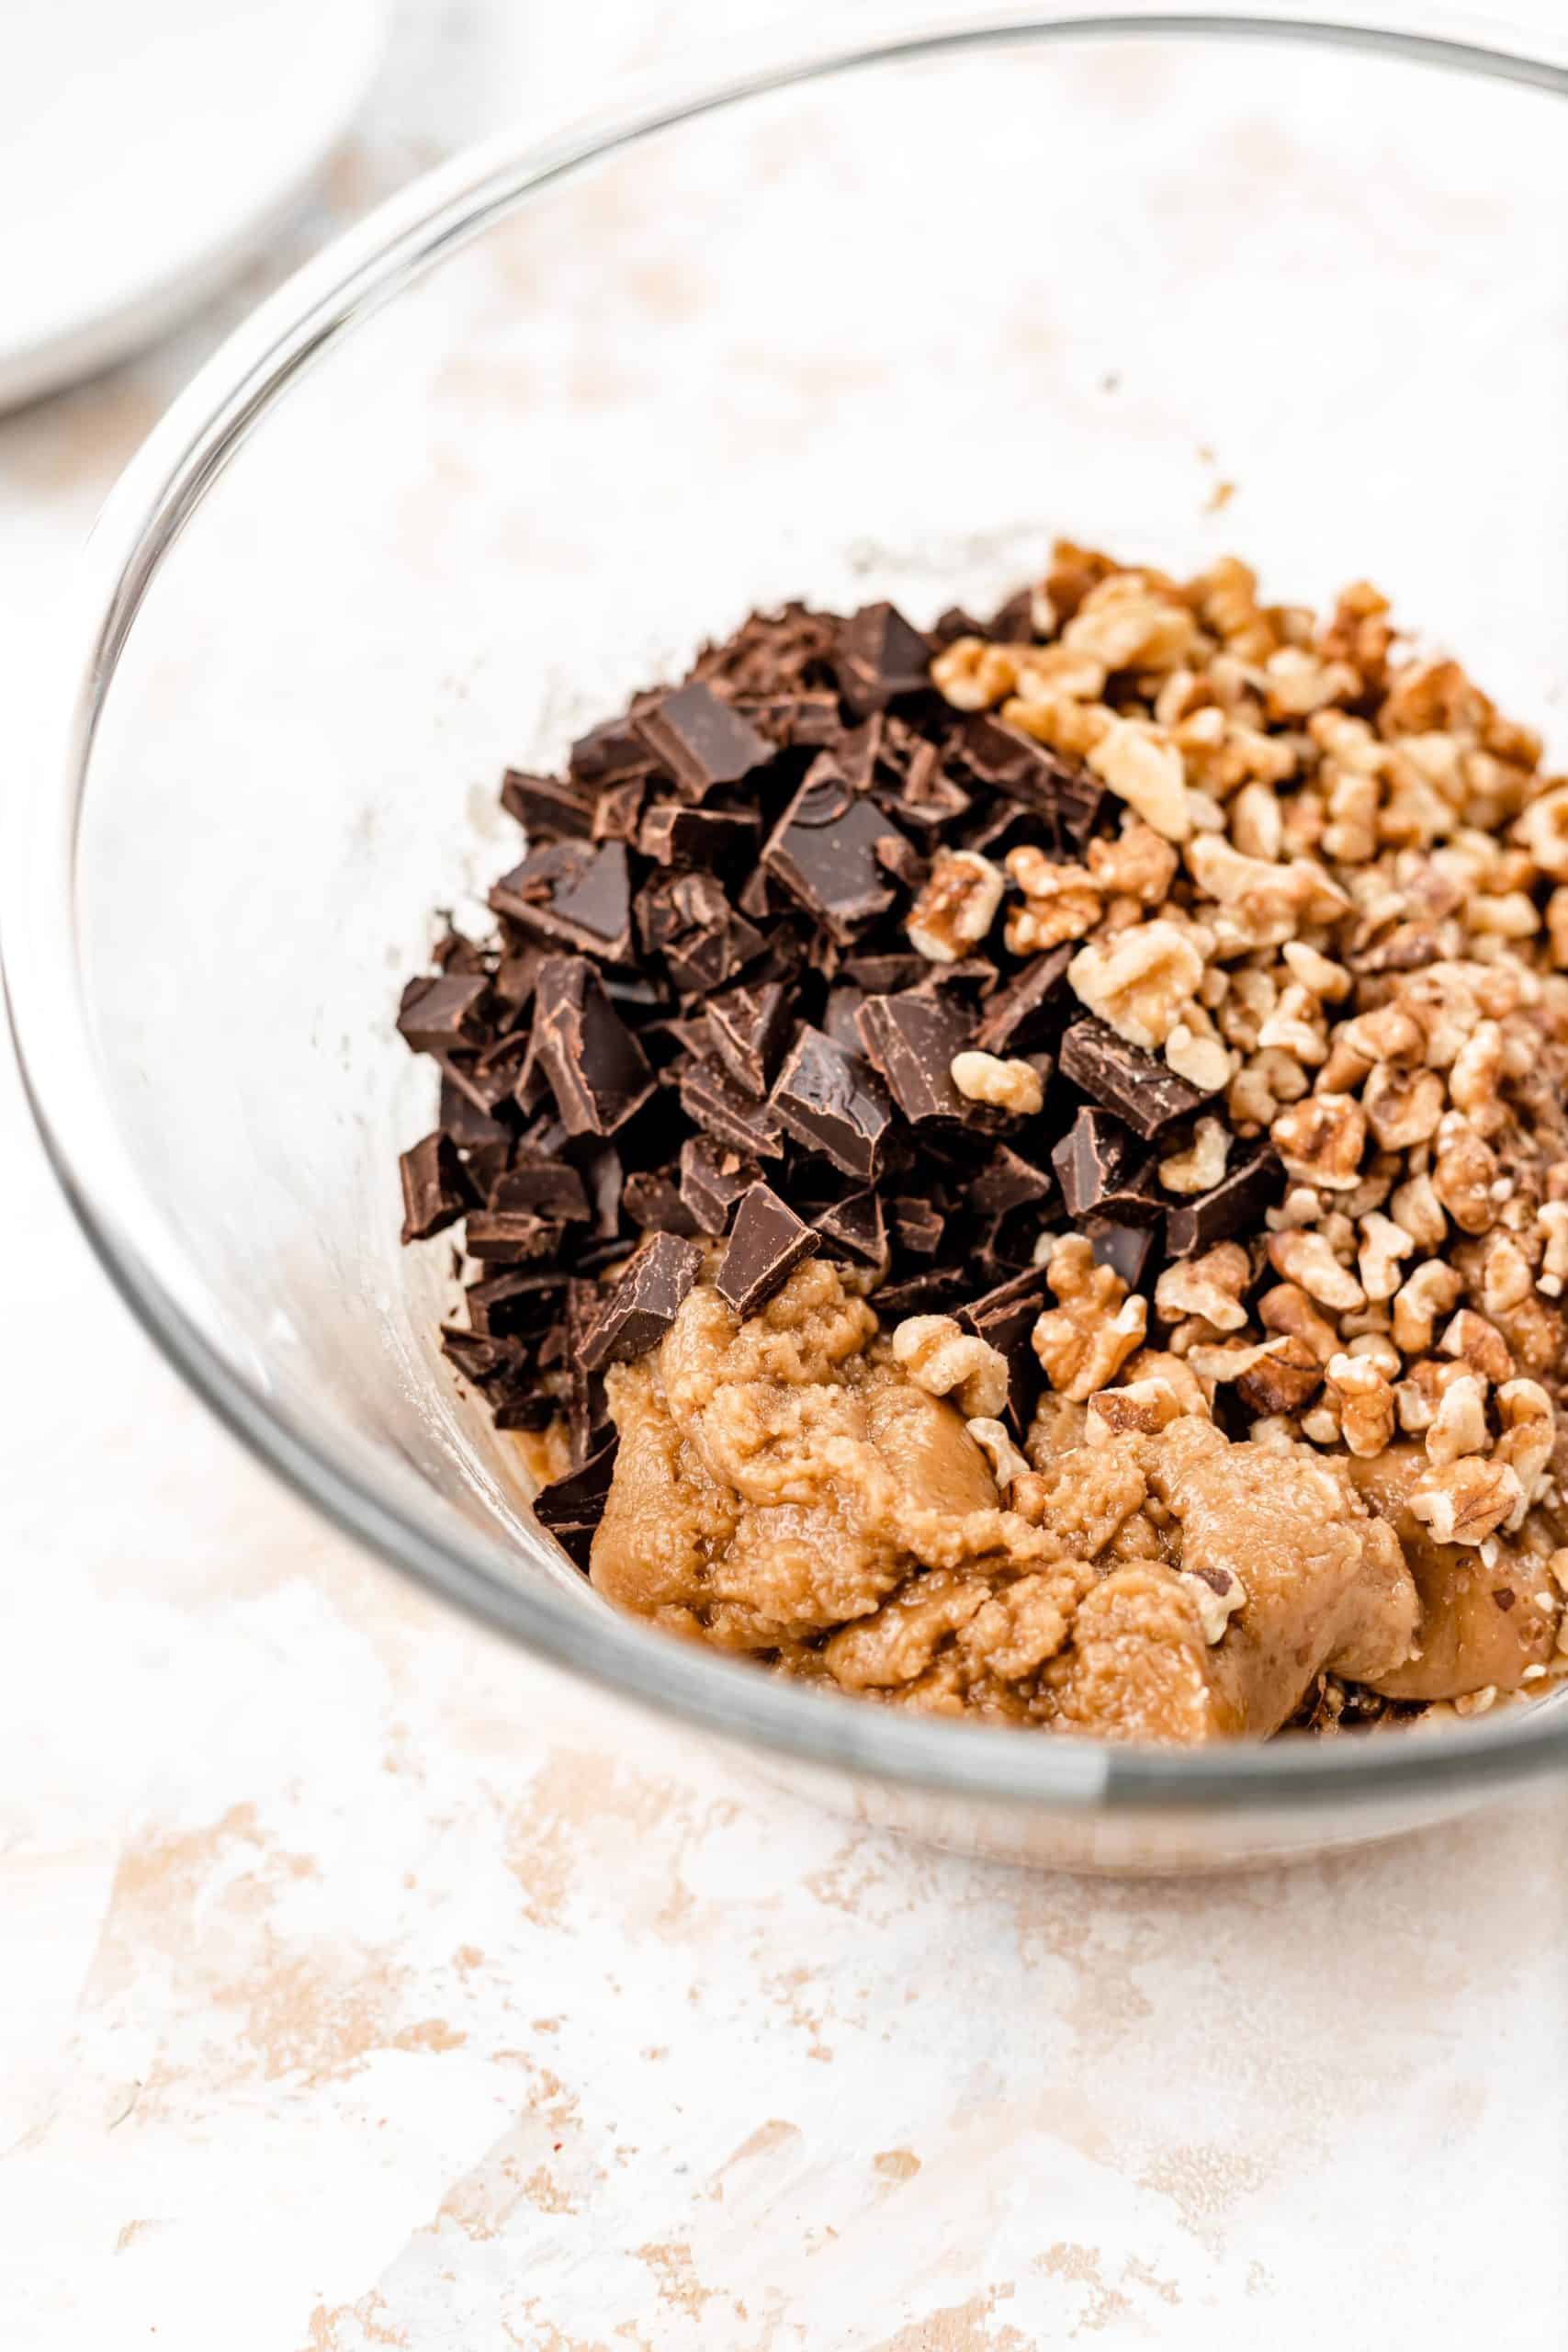 chopped chocolate, walnuts, and vegan cookie dough in a mixing bowl